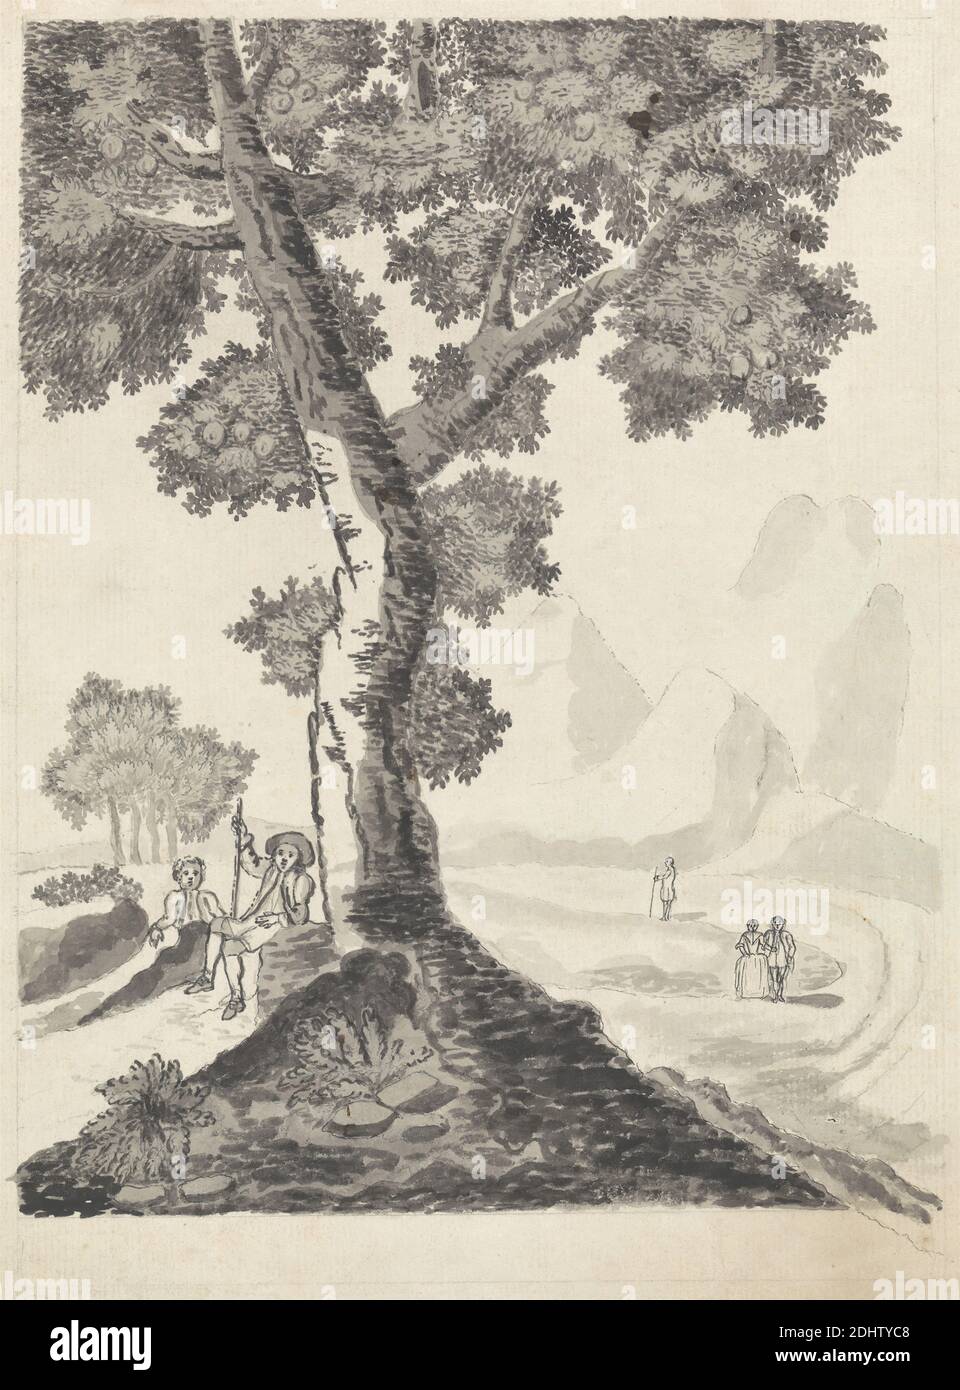 Six Men Talking, James Bruce, 1730–1794, British, undated, Pen and brown ink and gray wash on medium, slightly textured, beige laid paper, Sheet: 7 5/8 × 9 5/8 inches (19.4 × 24.4 cm Stock Photo